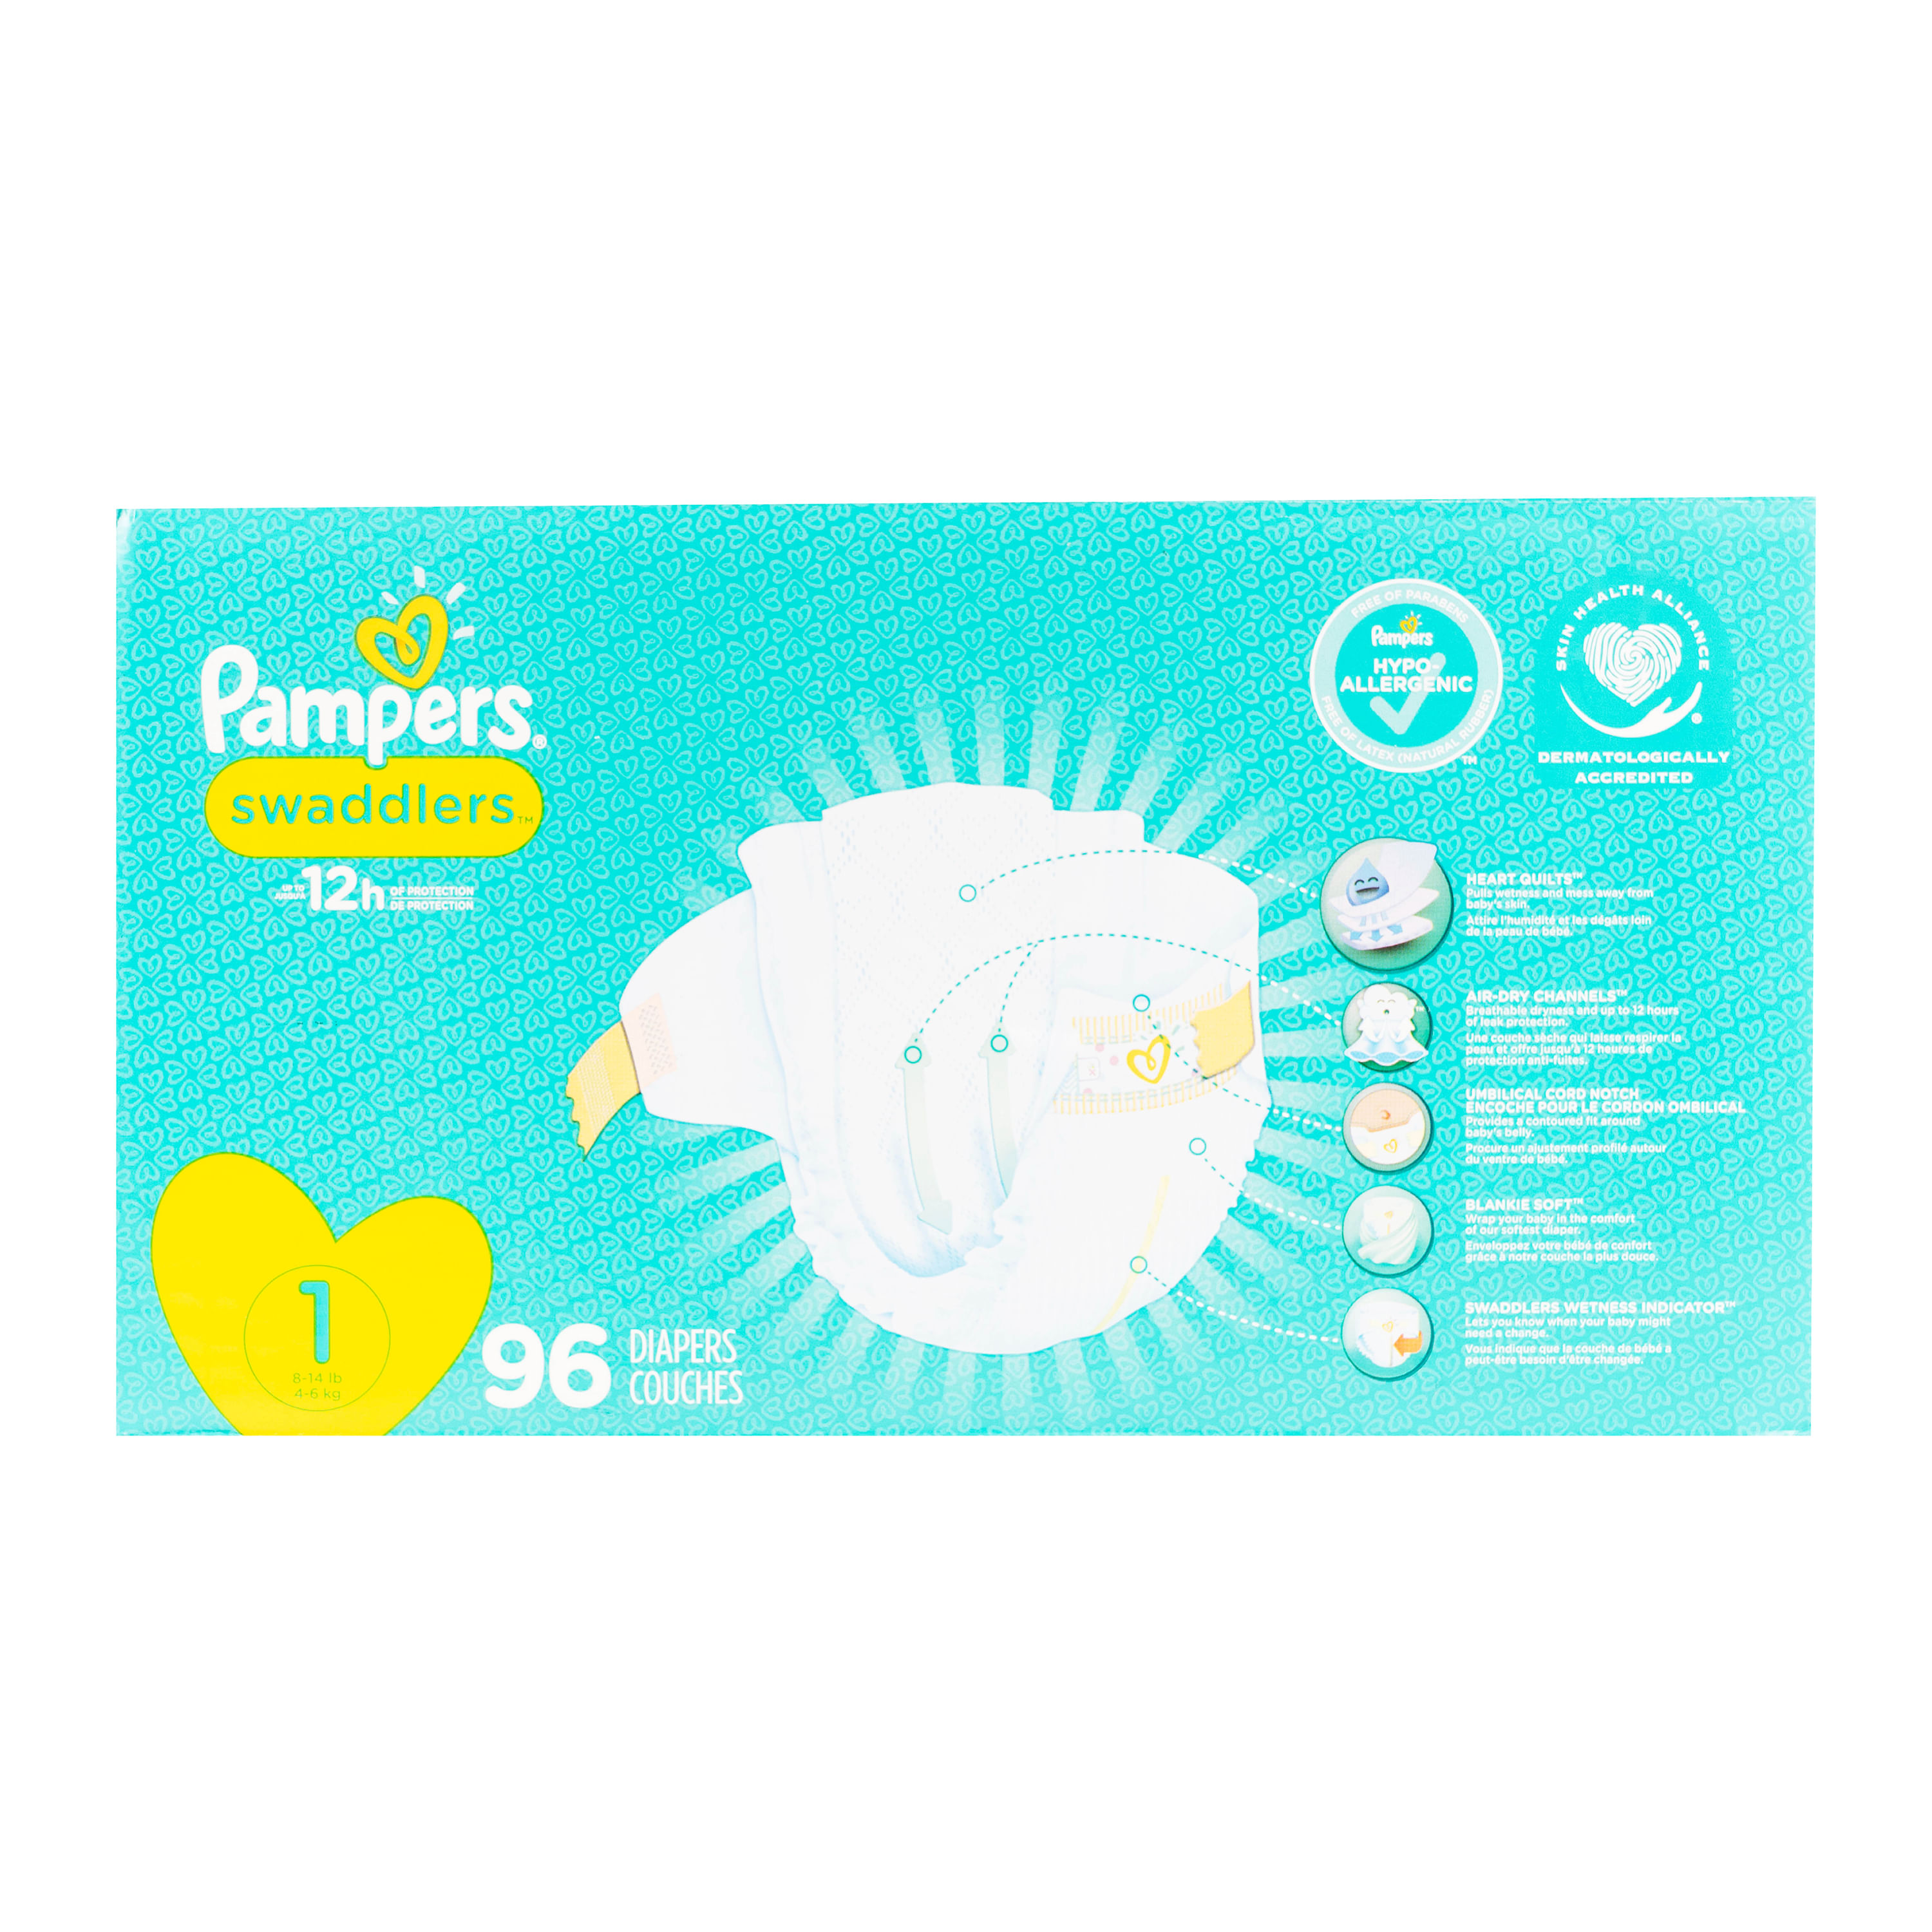 PAÑALES PAMPERS SWADDLERS TALLA 1 - 32 UND